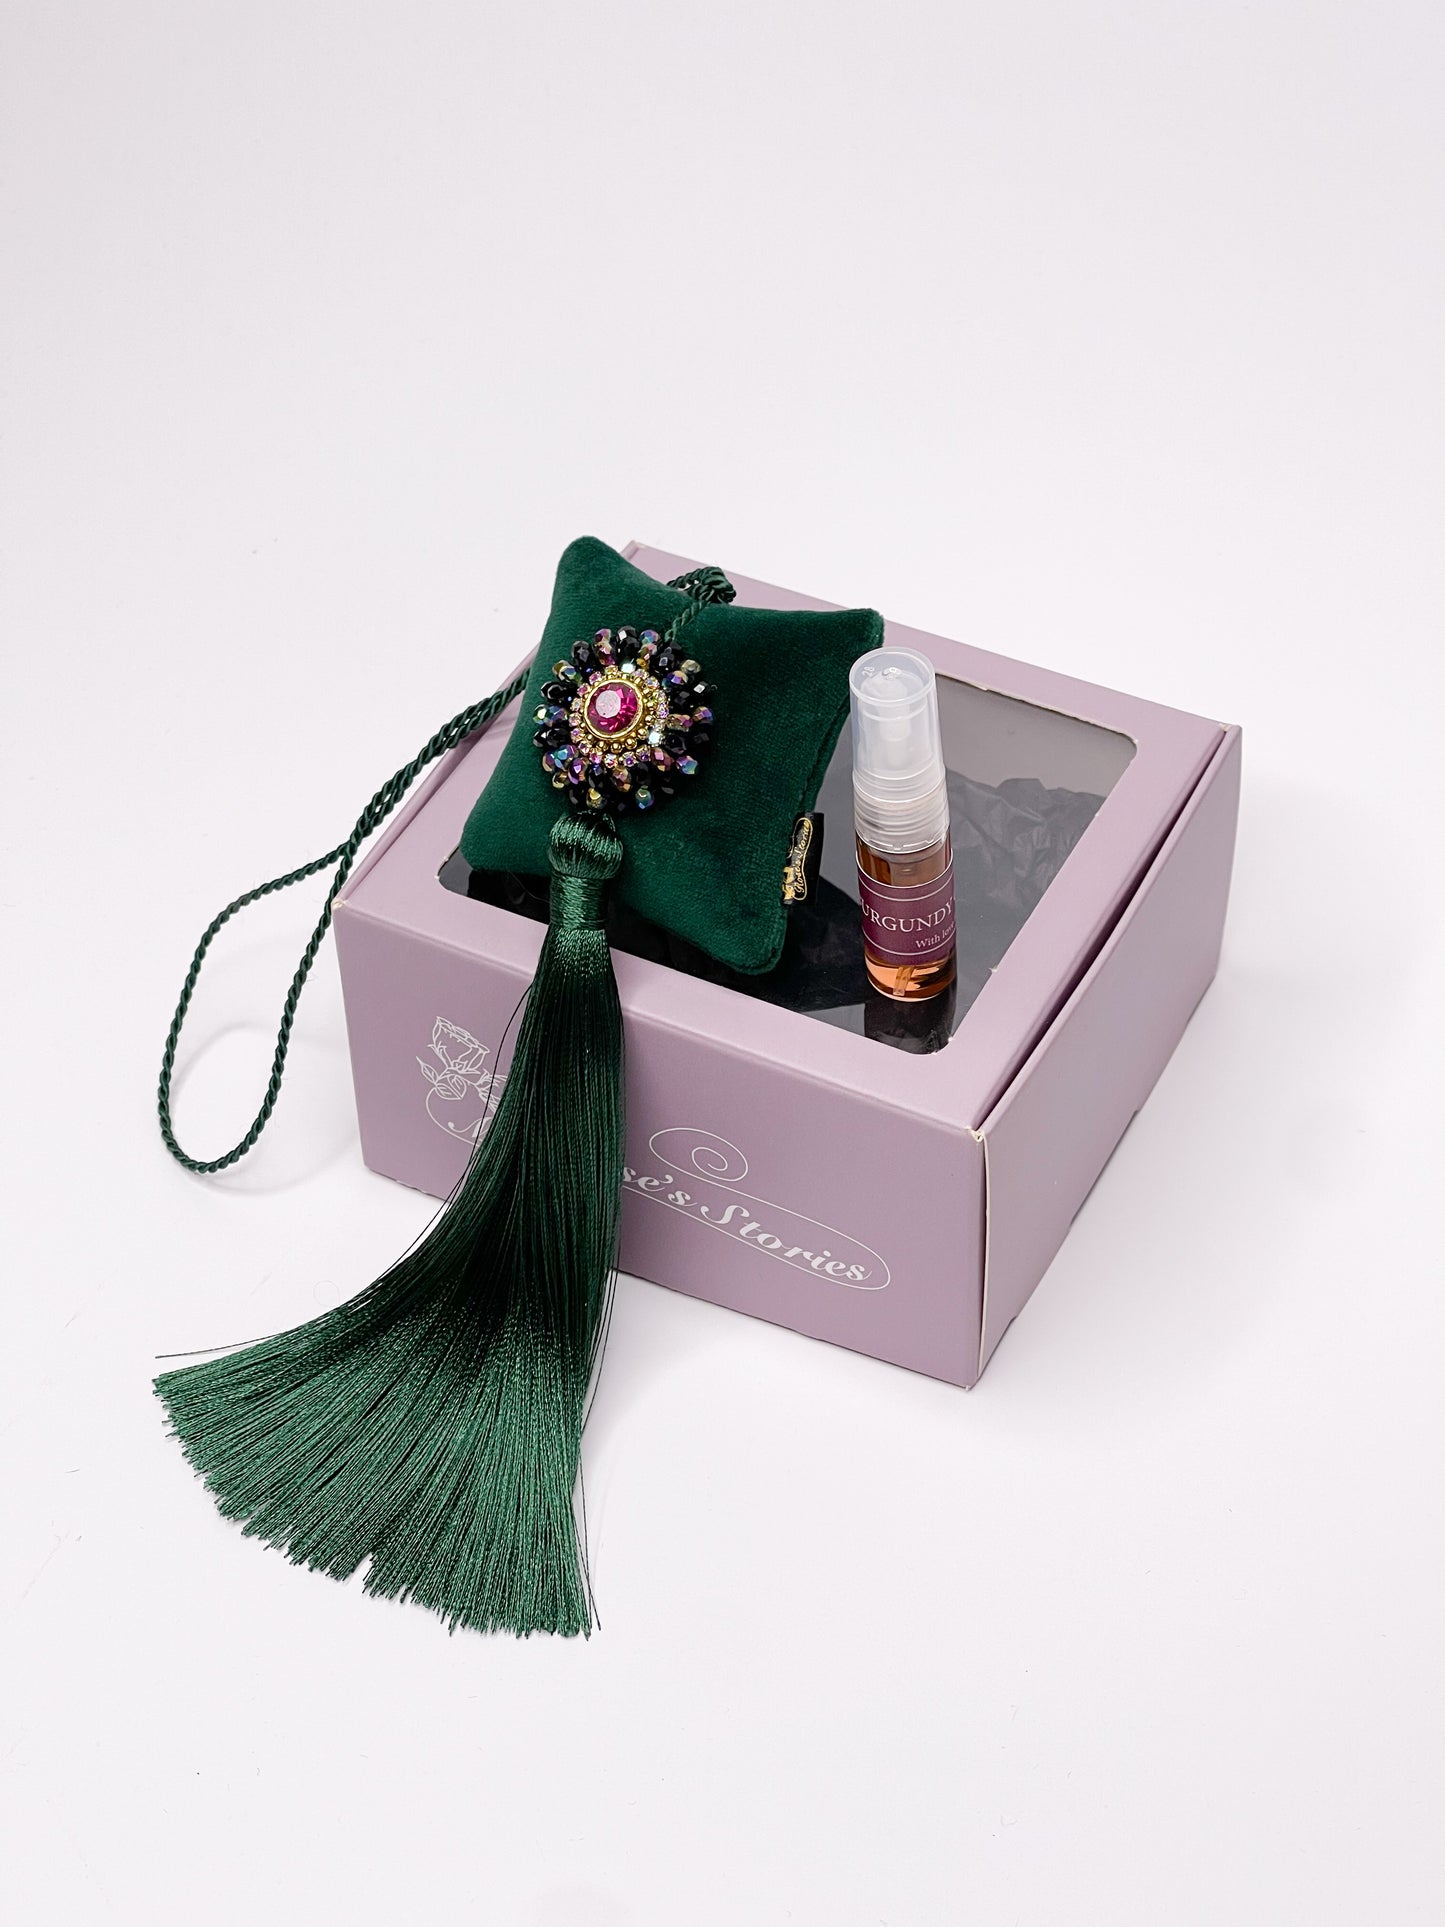 Hanging fragrance with sparkling crystals and long tassel.